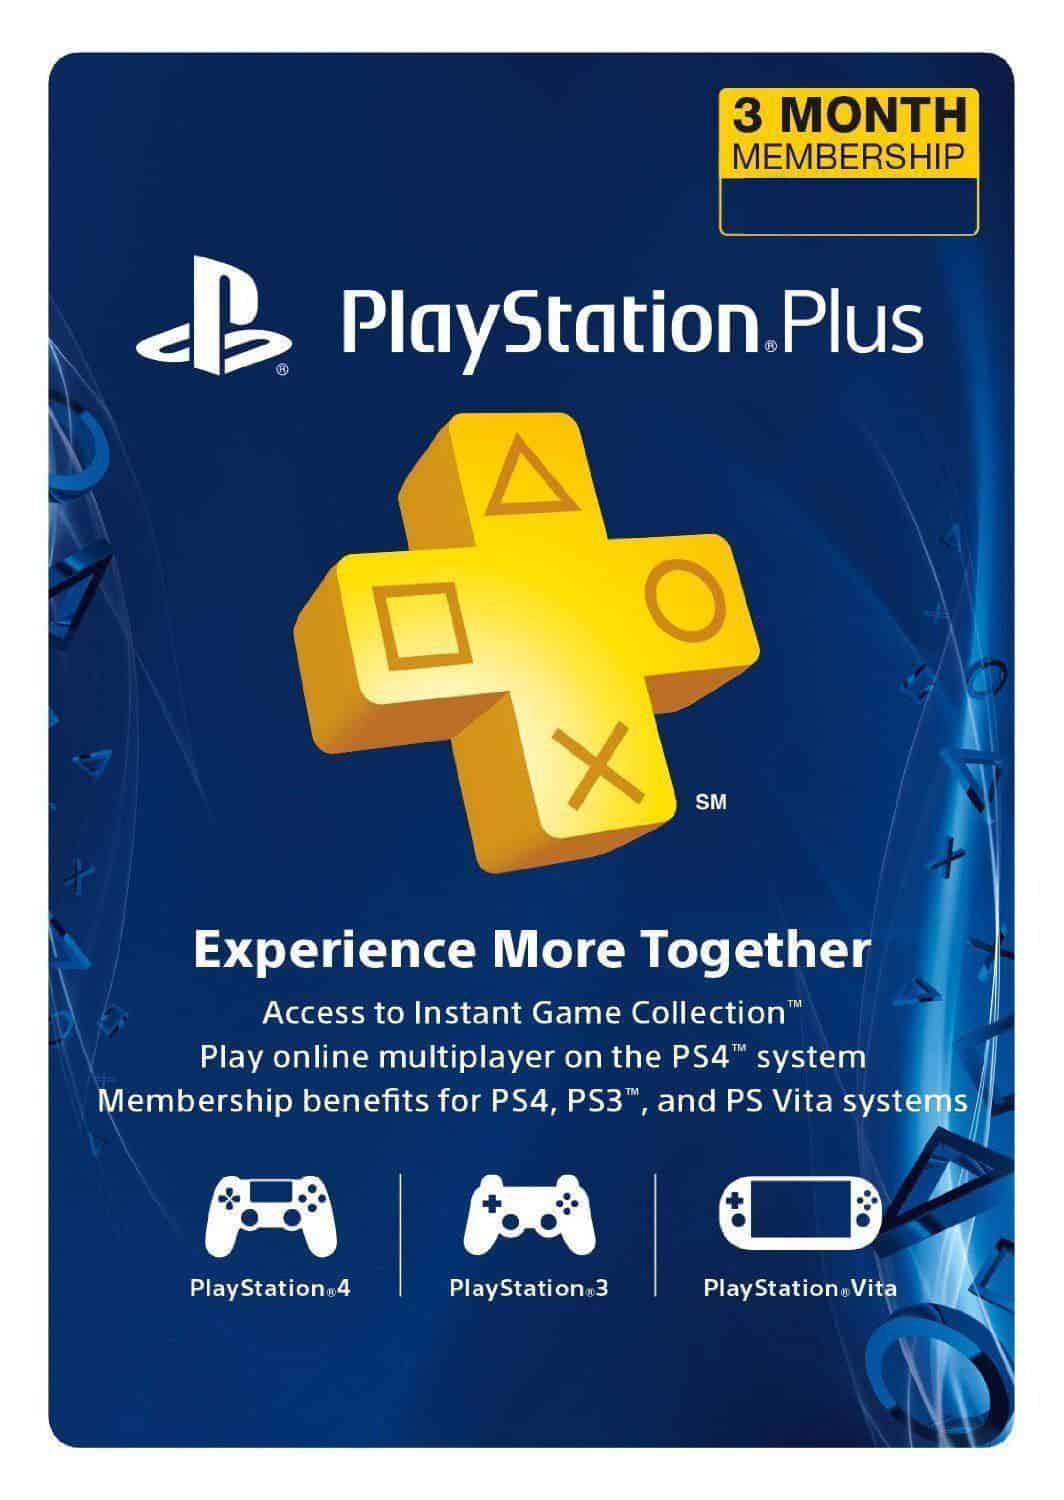 Sony Raising PlayStation Plus Prices By Up To $AU40 A Year